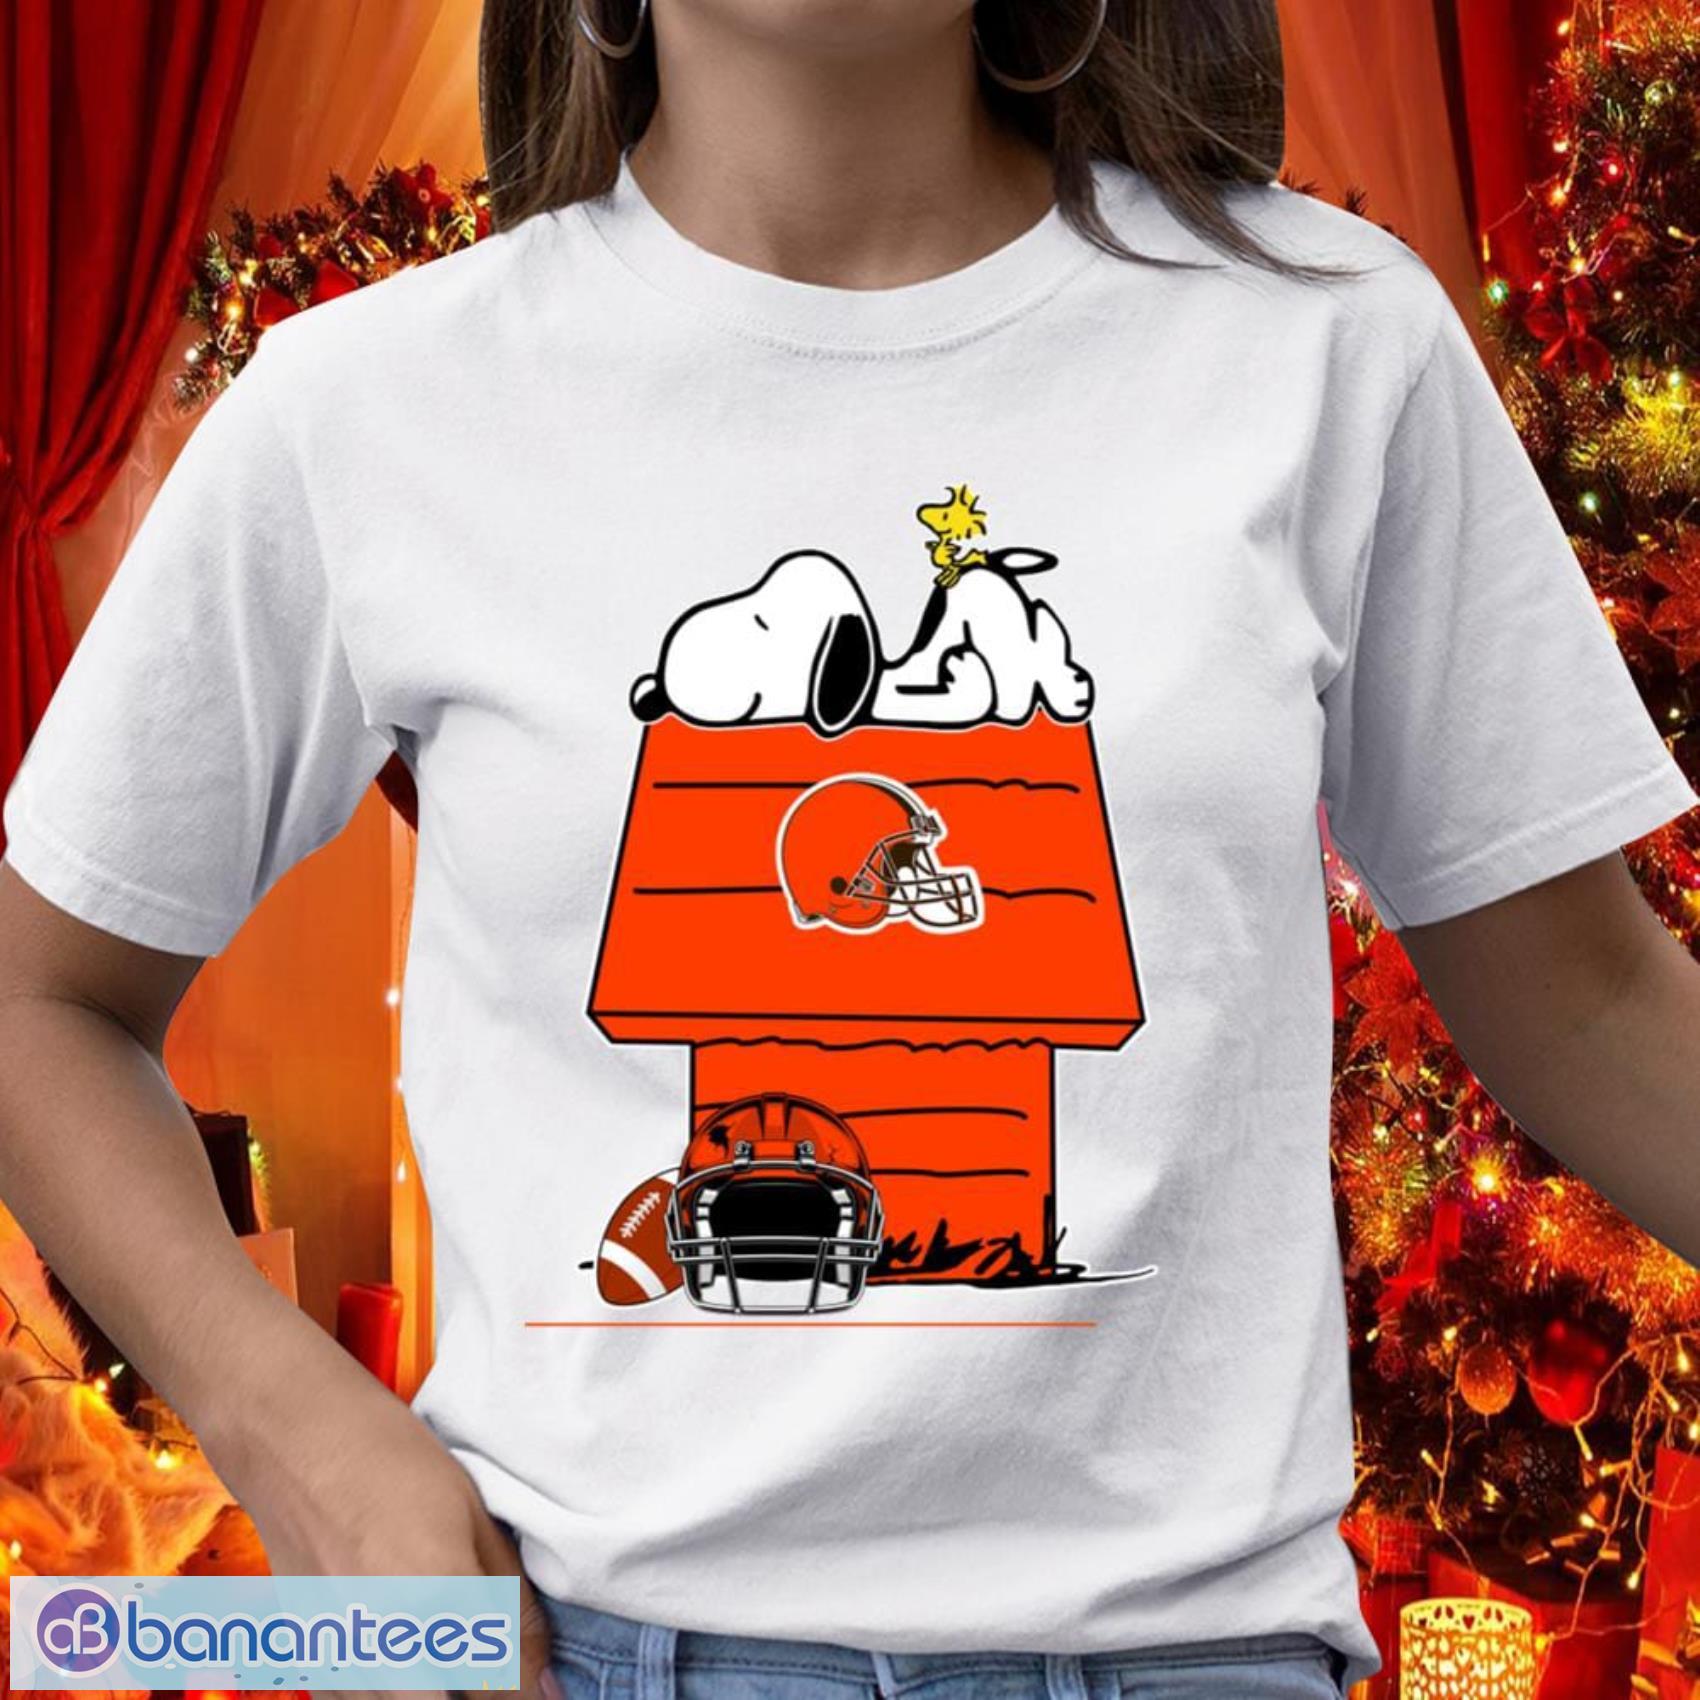 Cleveland Browns NFL Football Snoopy Woodstock The Peanuts Movie T